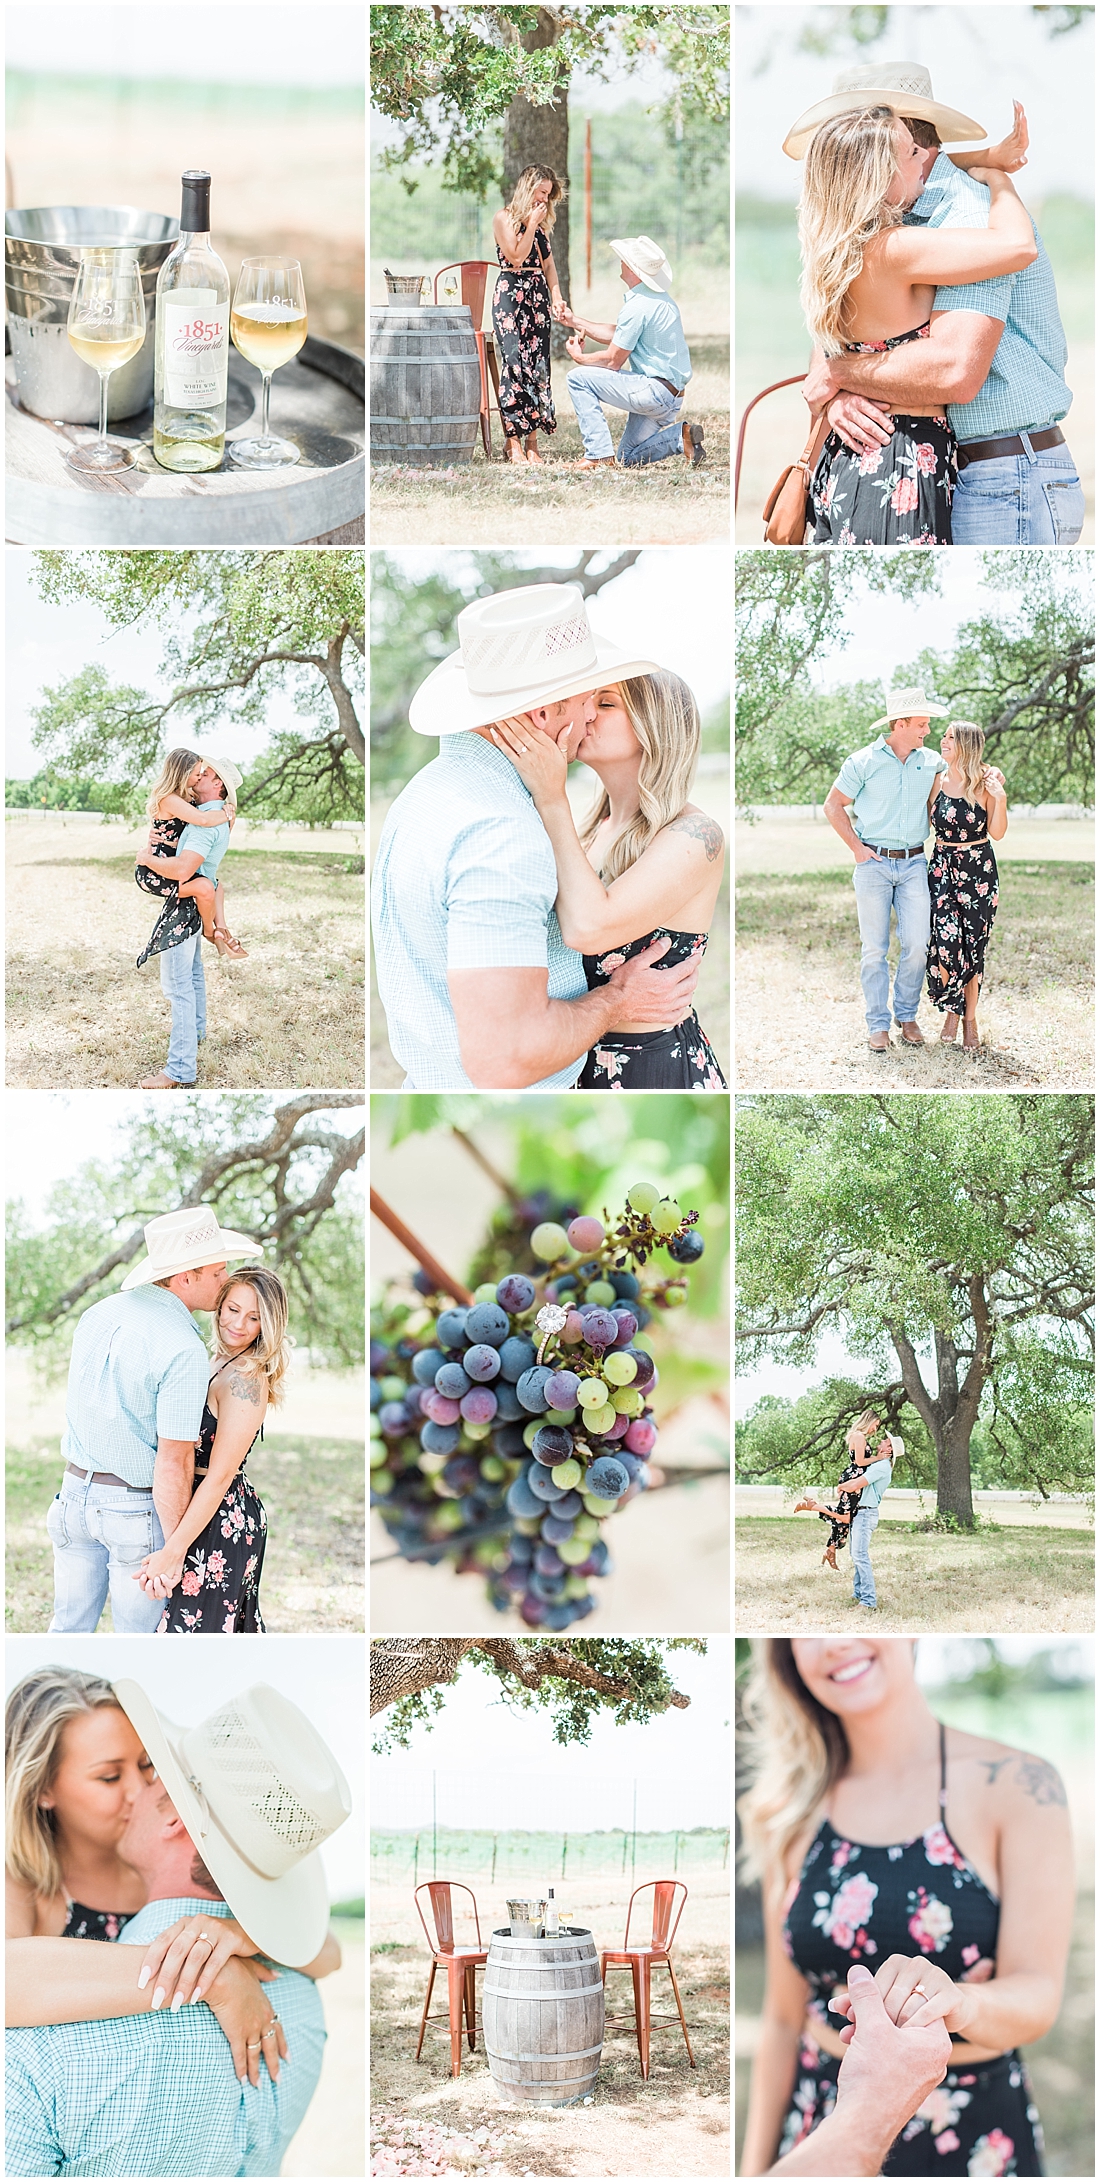 a surprise proposal at 1851 vineyard in Fredericksburg, Texas by Allison Jeffers Wedding Photography 0042